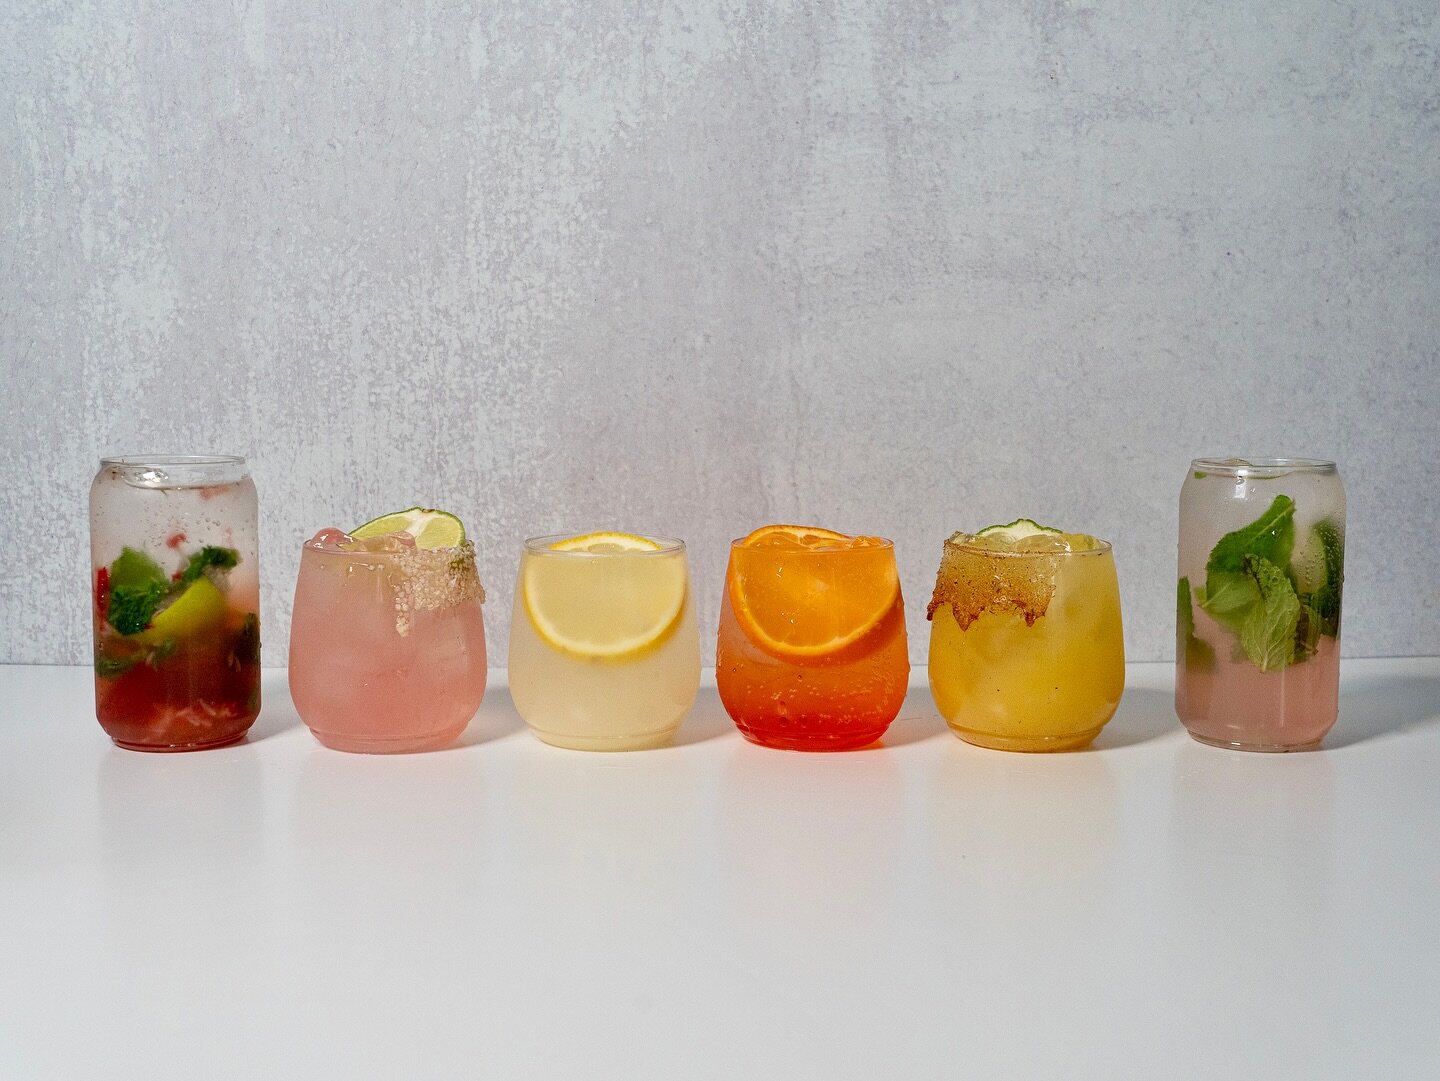 A beautiful lineup with some of our favorite cocktails! 😍✨👇🏼 Which would you choose?! 

Strawberry Mojito
Watermelon Margarita
Limoncello Spritz
Aperol Spritz
Pineapple Margarita 
Watermelon Mojito

*All cocktails are featured in our cup upgrade o